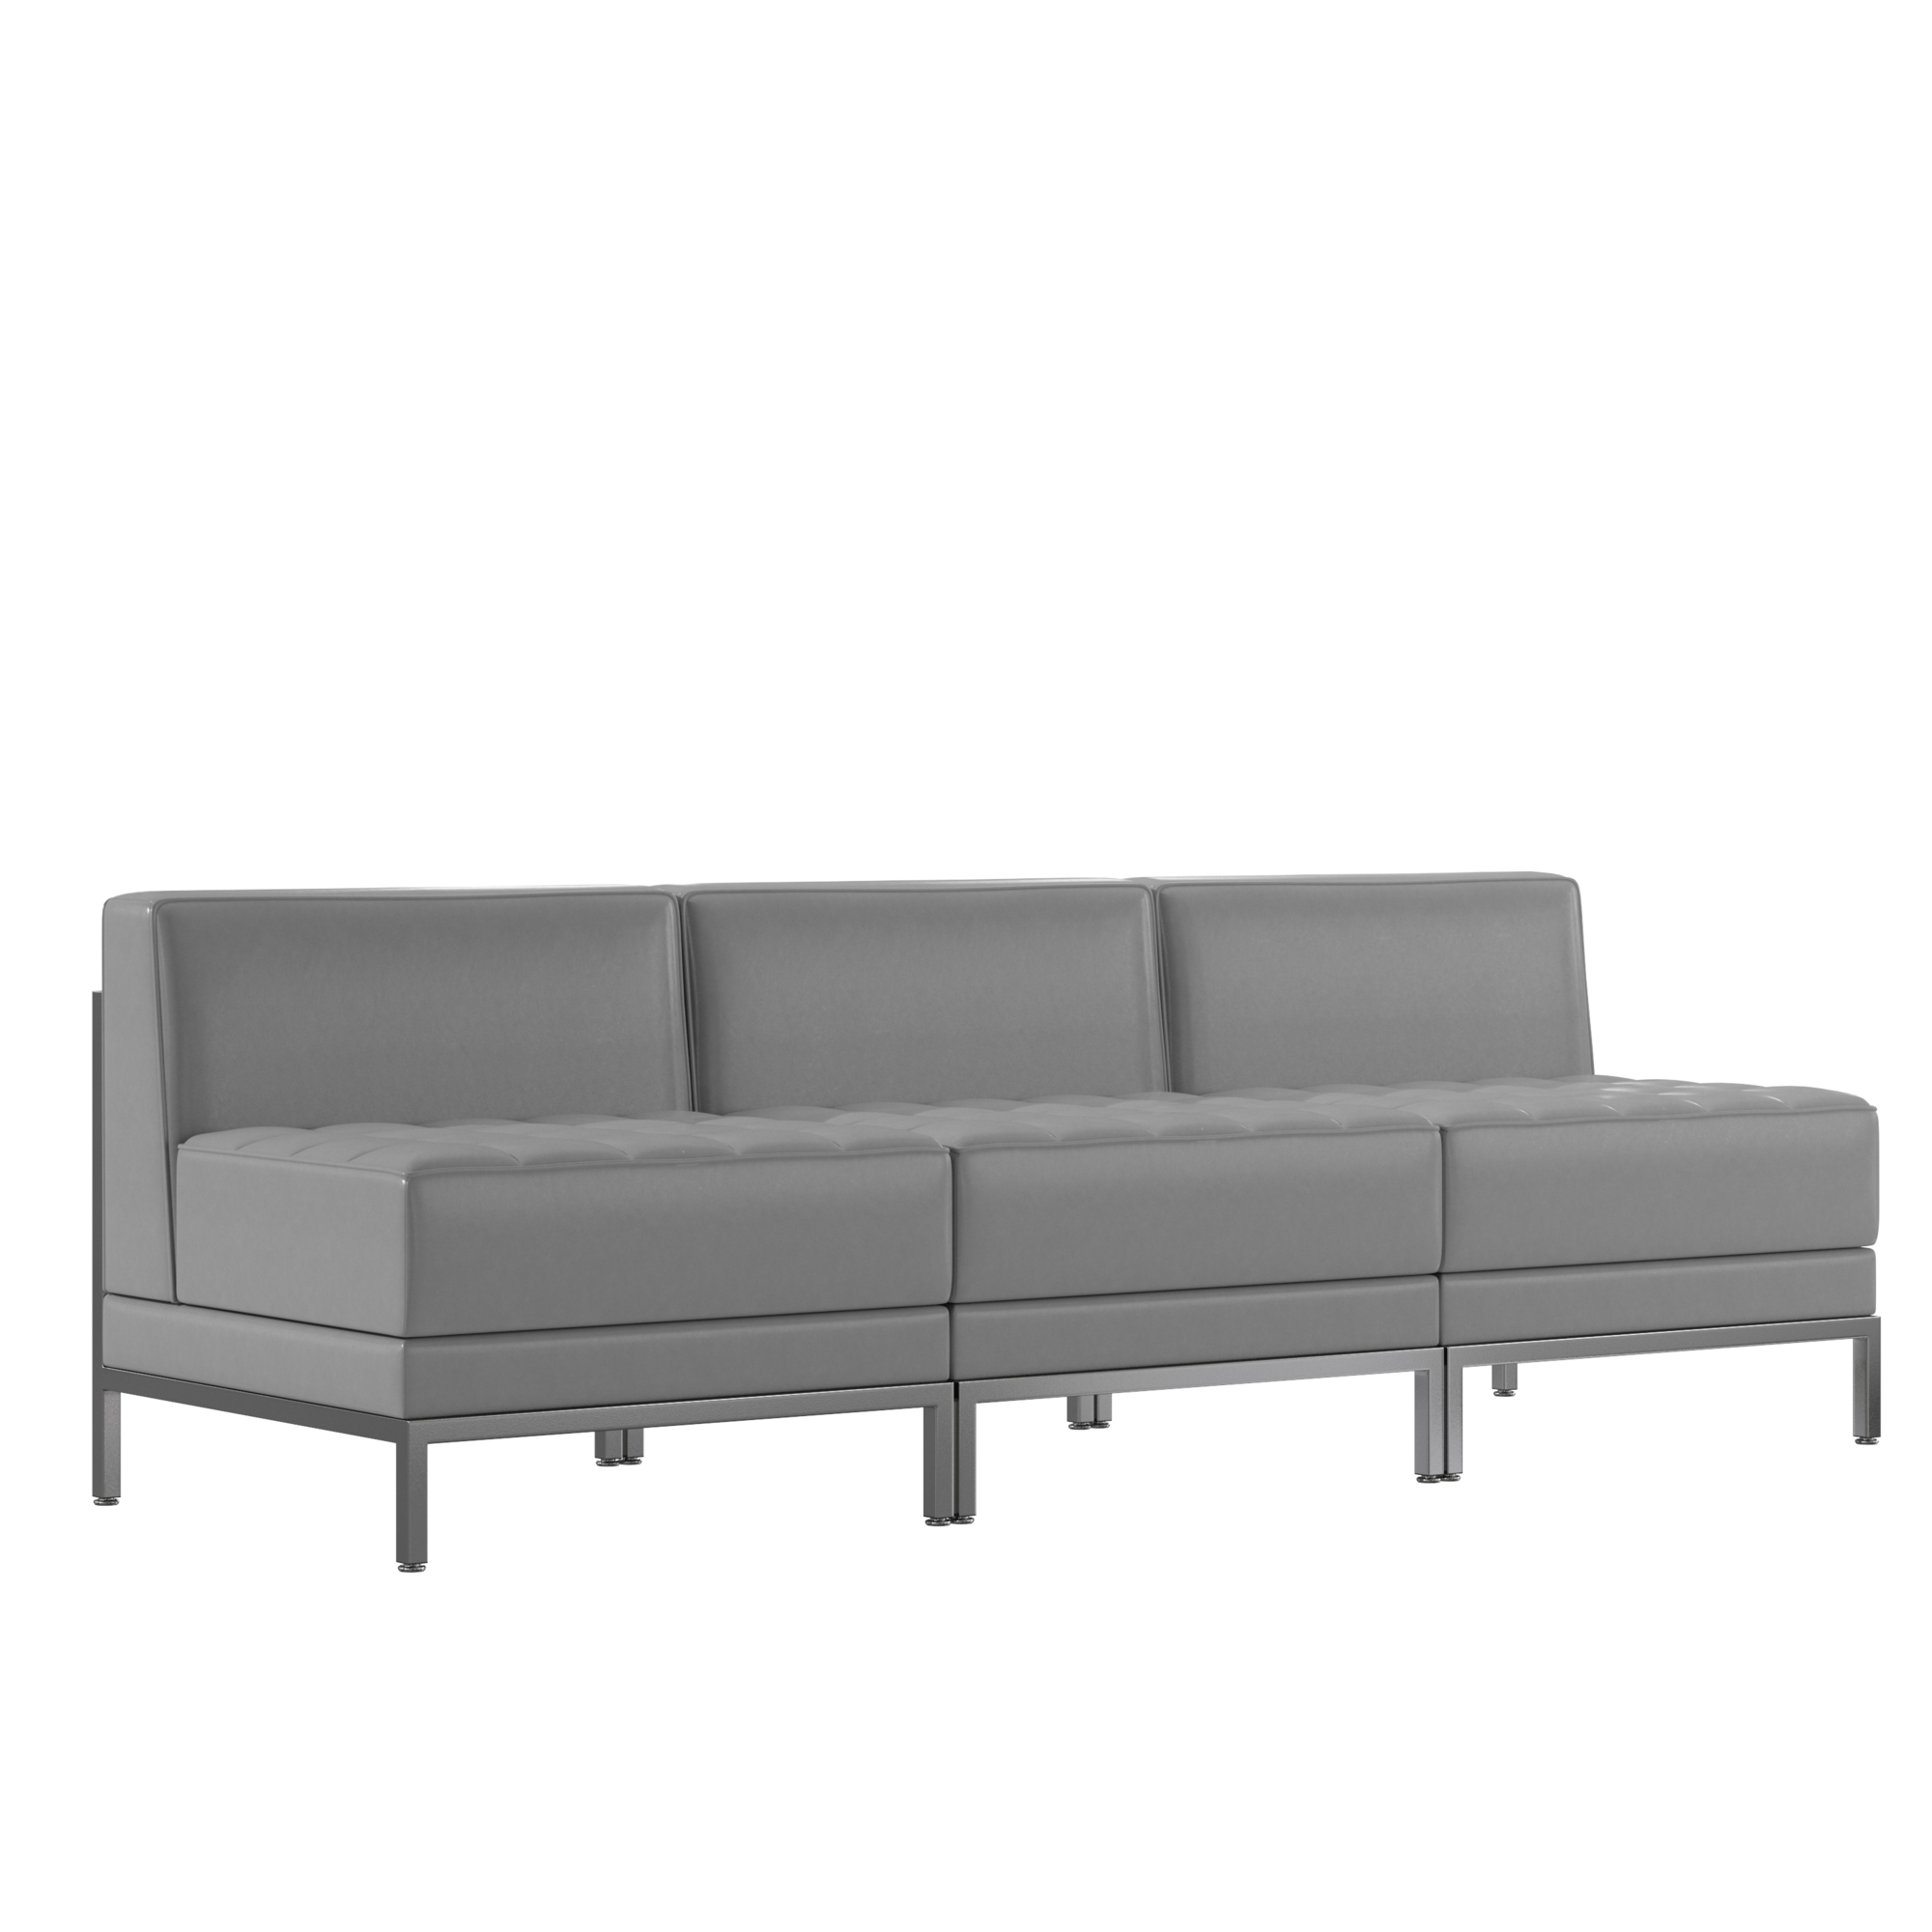 Flash Furniture, 3 Piece Gray LeatherSoft Modular Lounge Set, Primary Color Gray, Included (qty.) 3, Model ZBIMAGMIDCH3GY